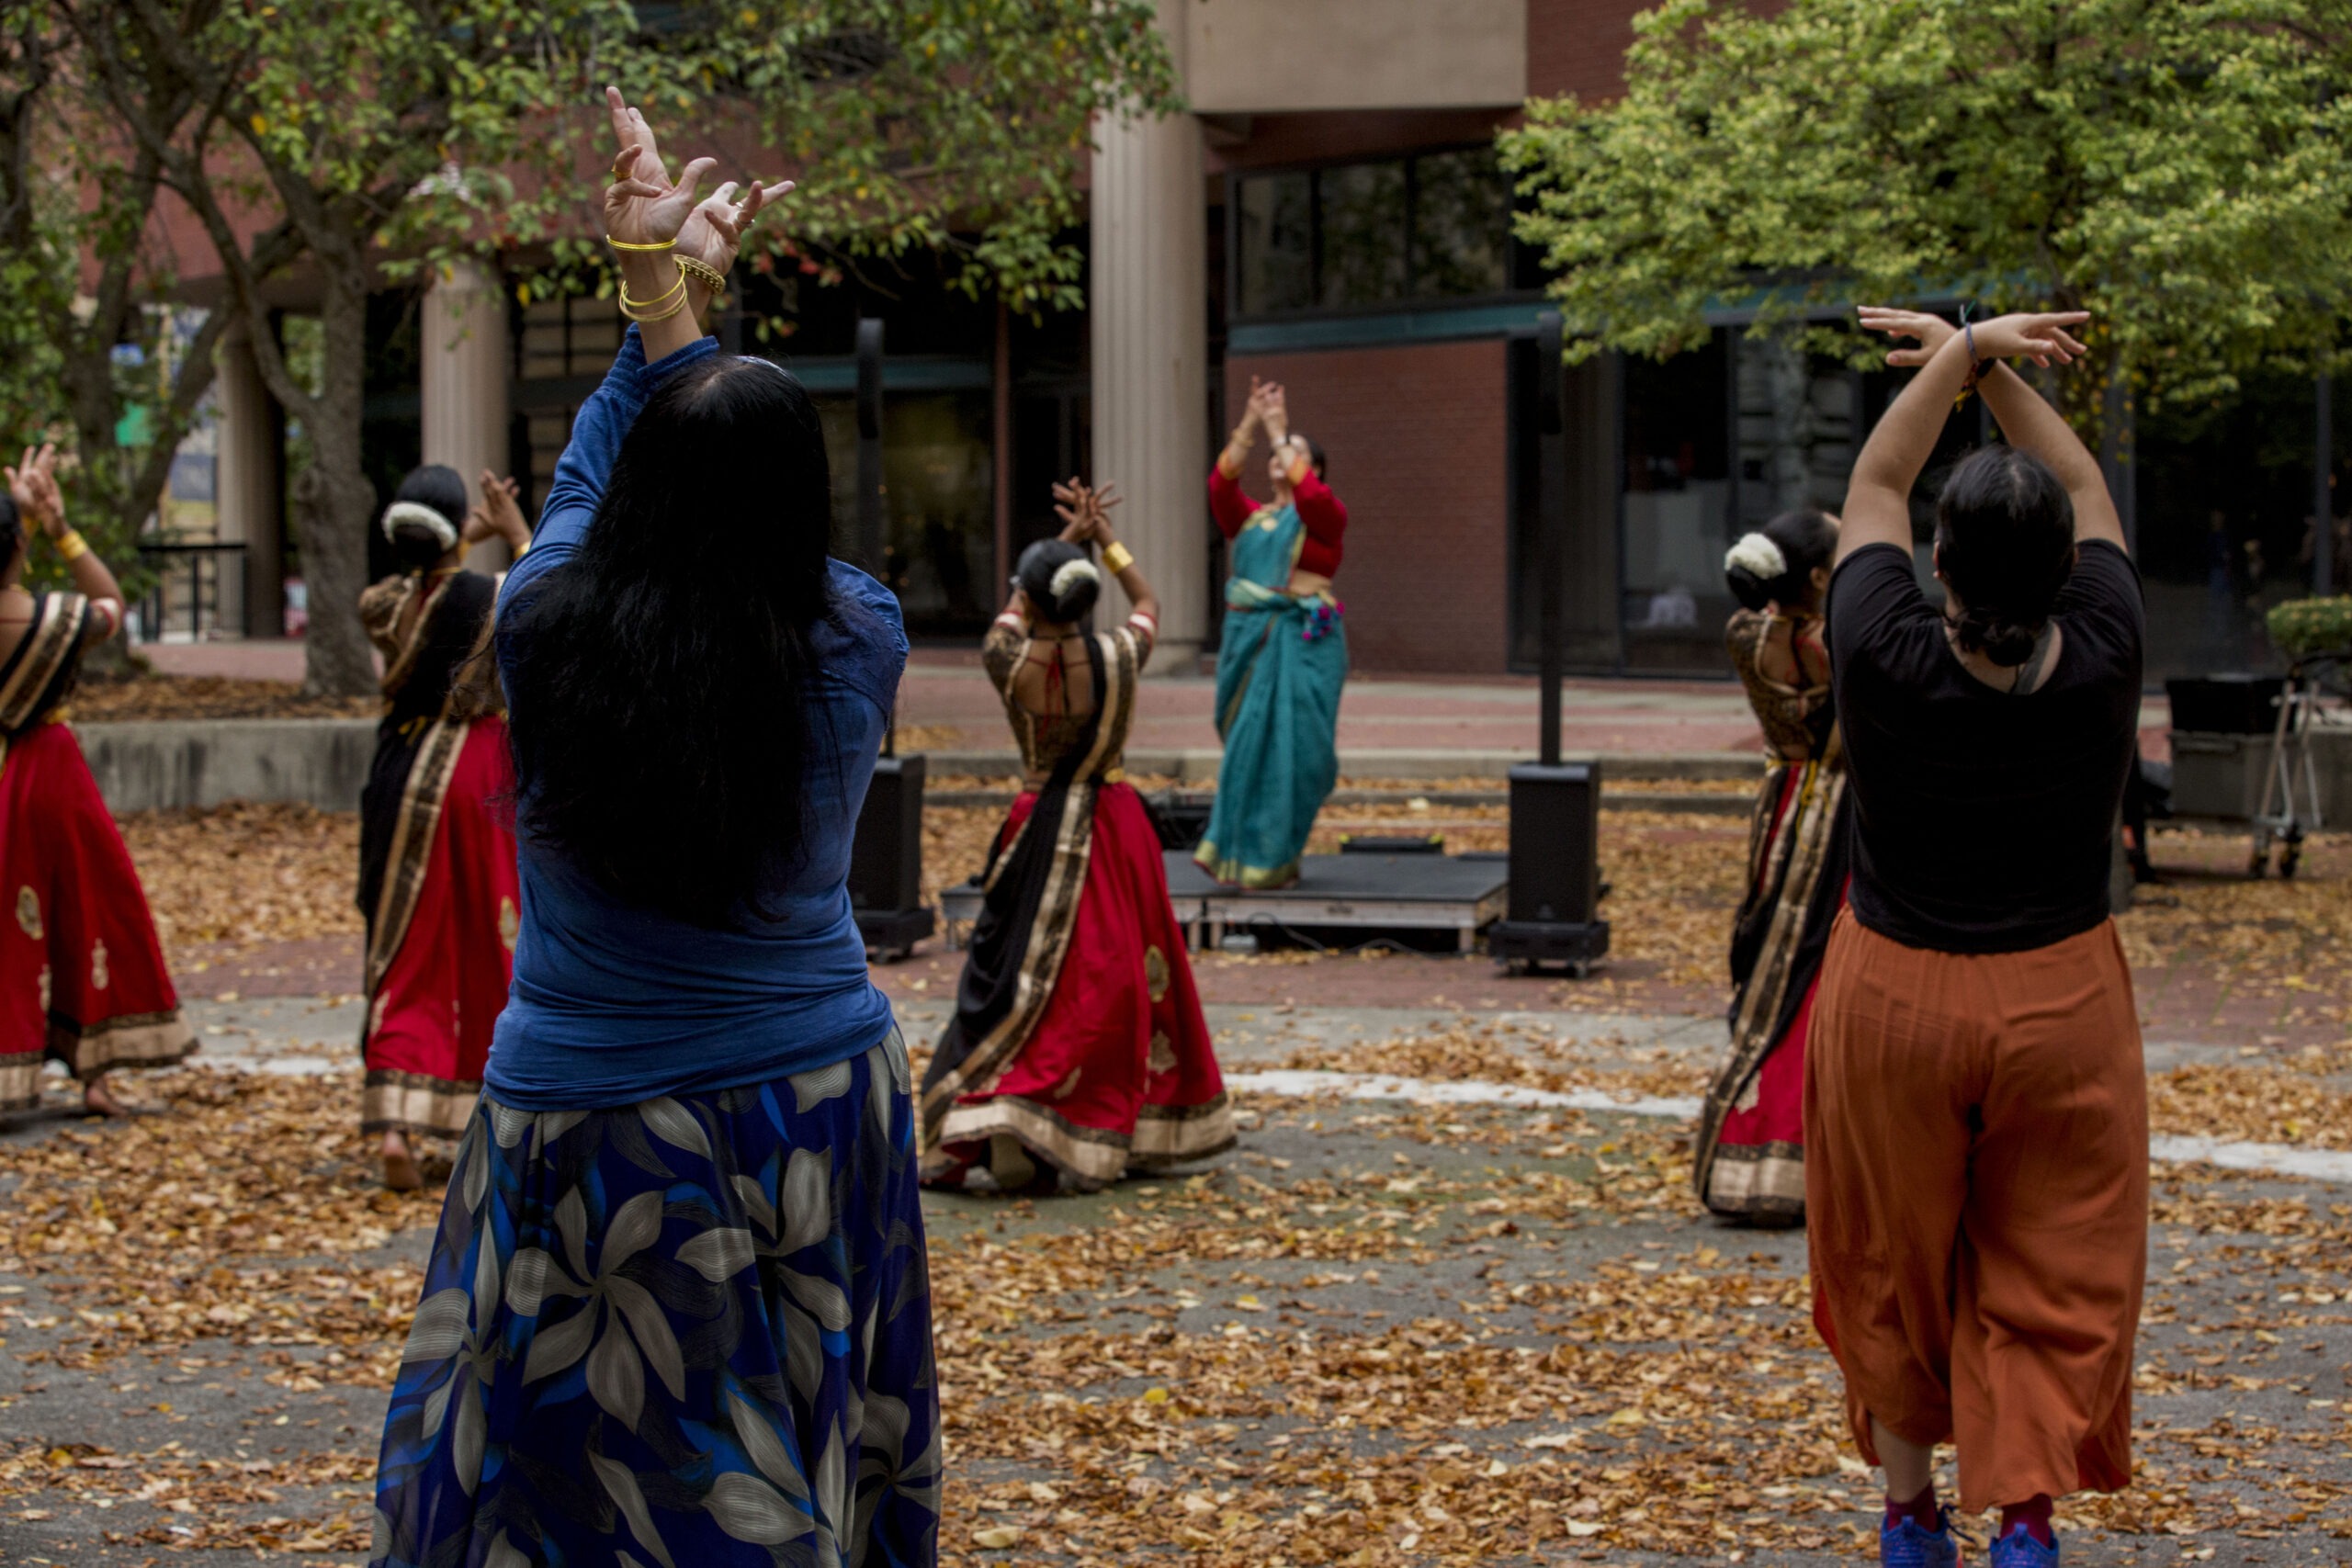 Sanskruti School of Indian Dance and Music leading an outdoor class at Allegheny Landing